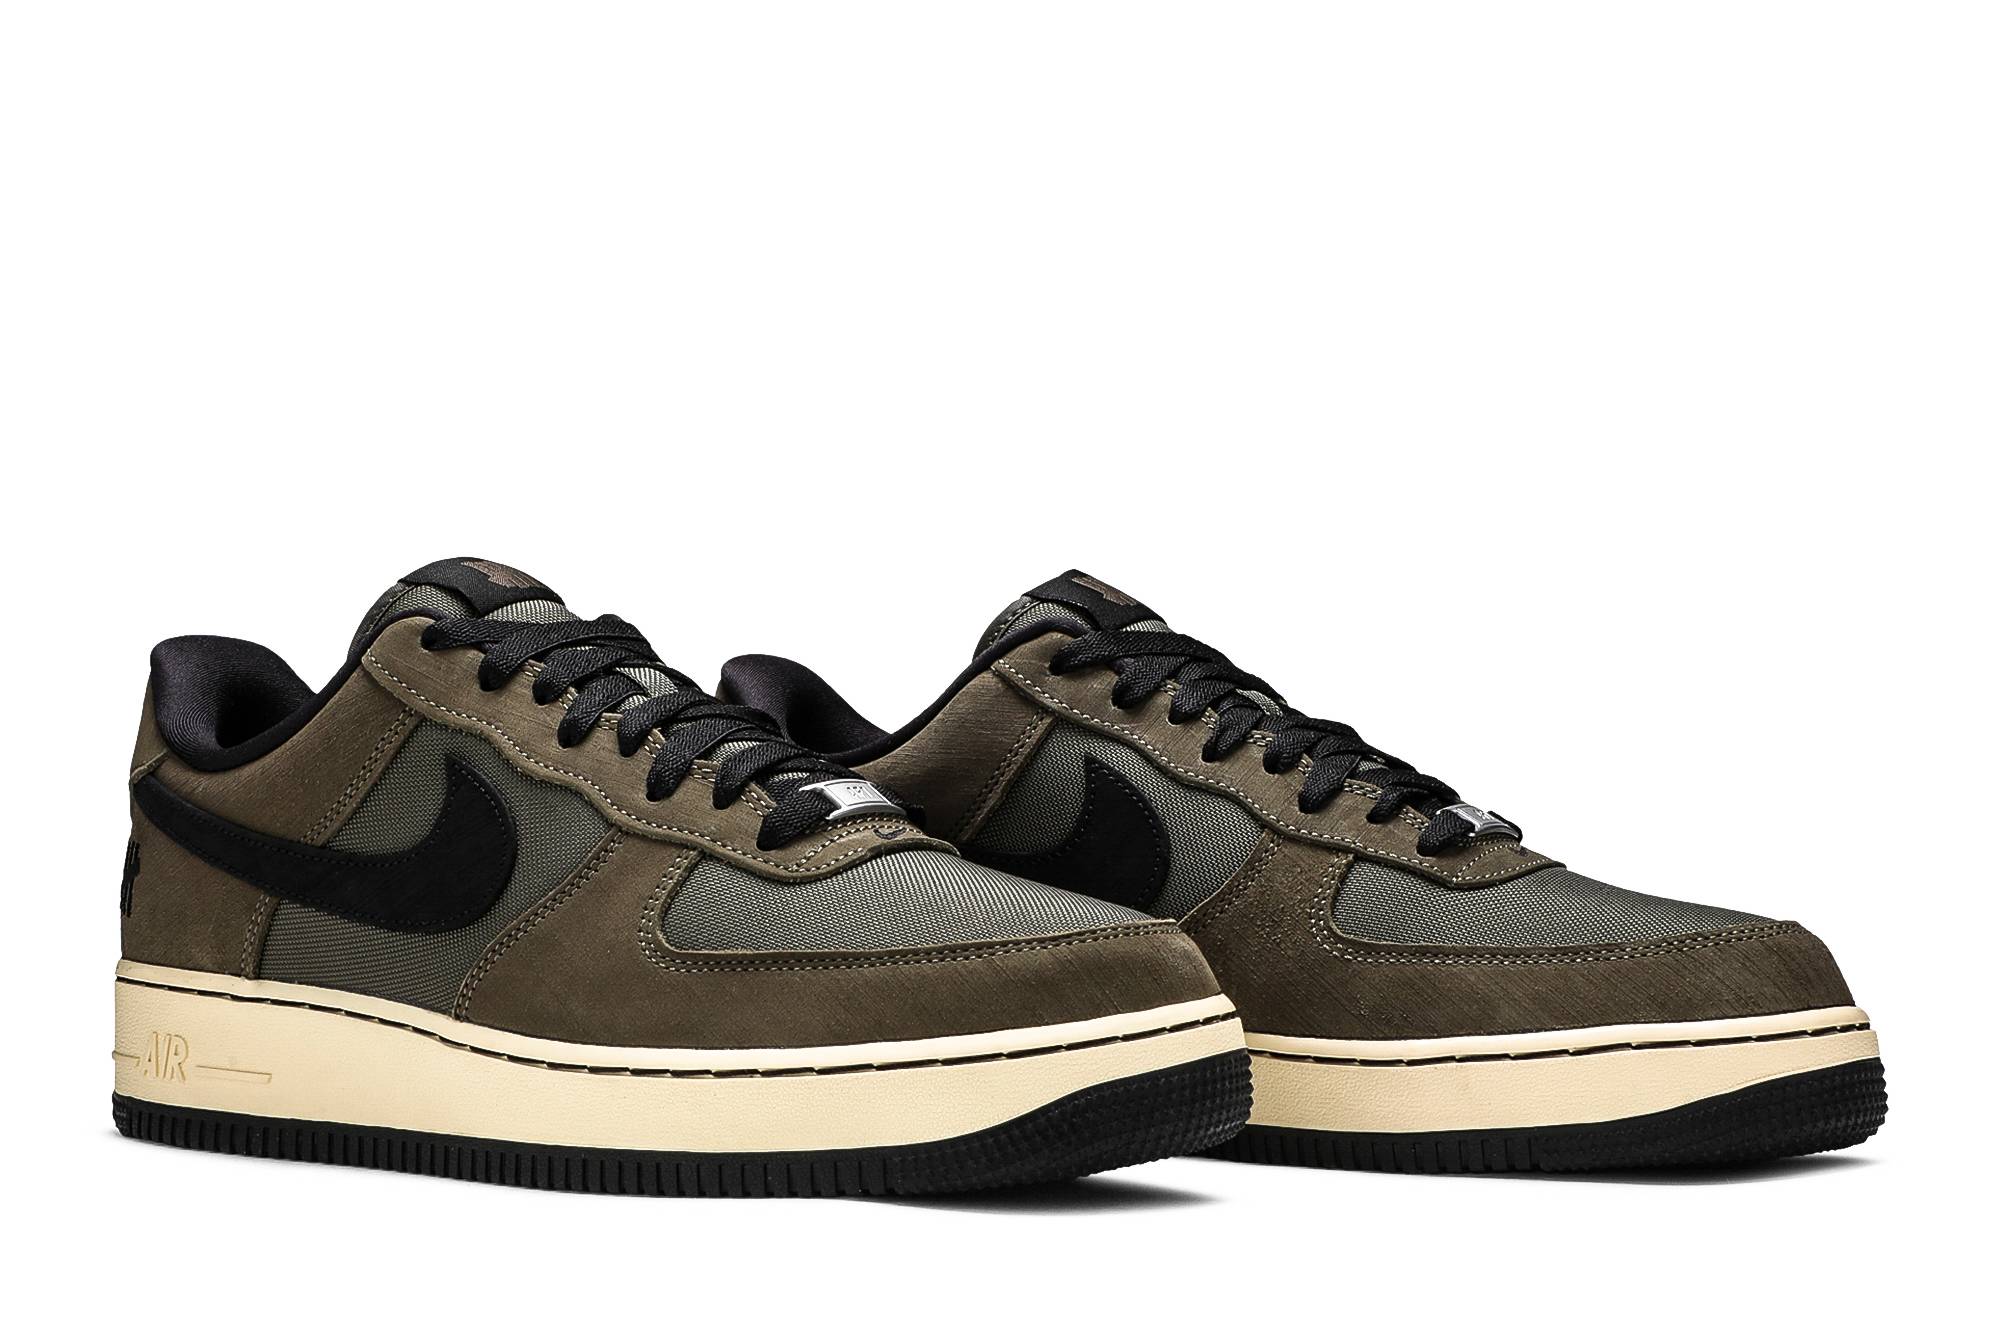 UNDEFEATED x Nike Air Force 1 Low SP 'Ballistic' DH3064-300